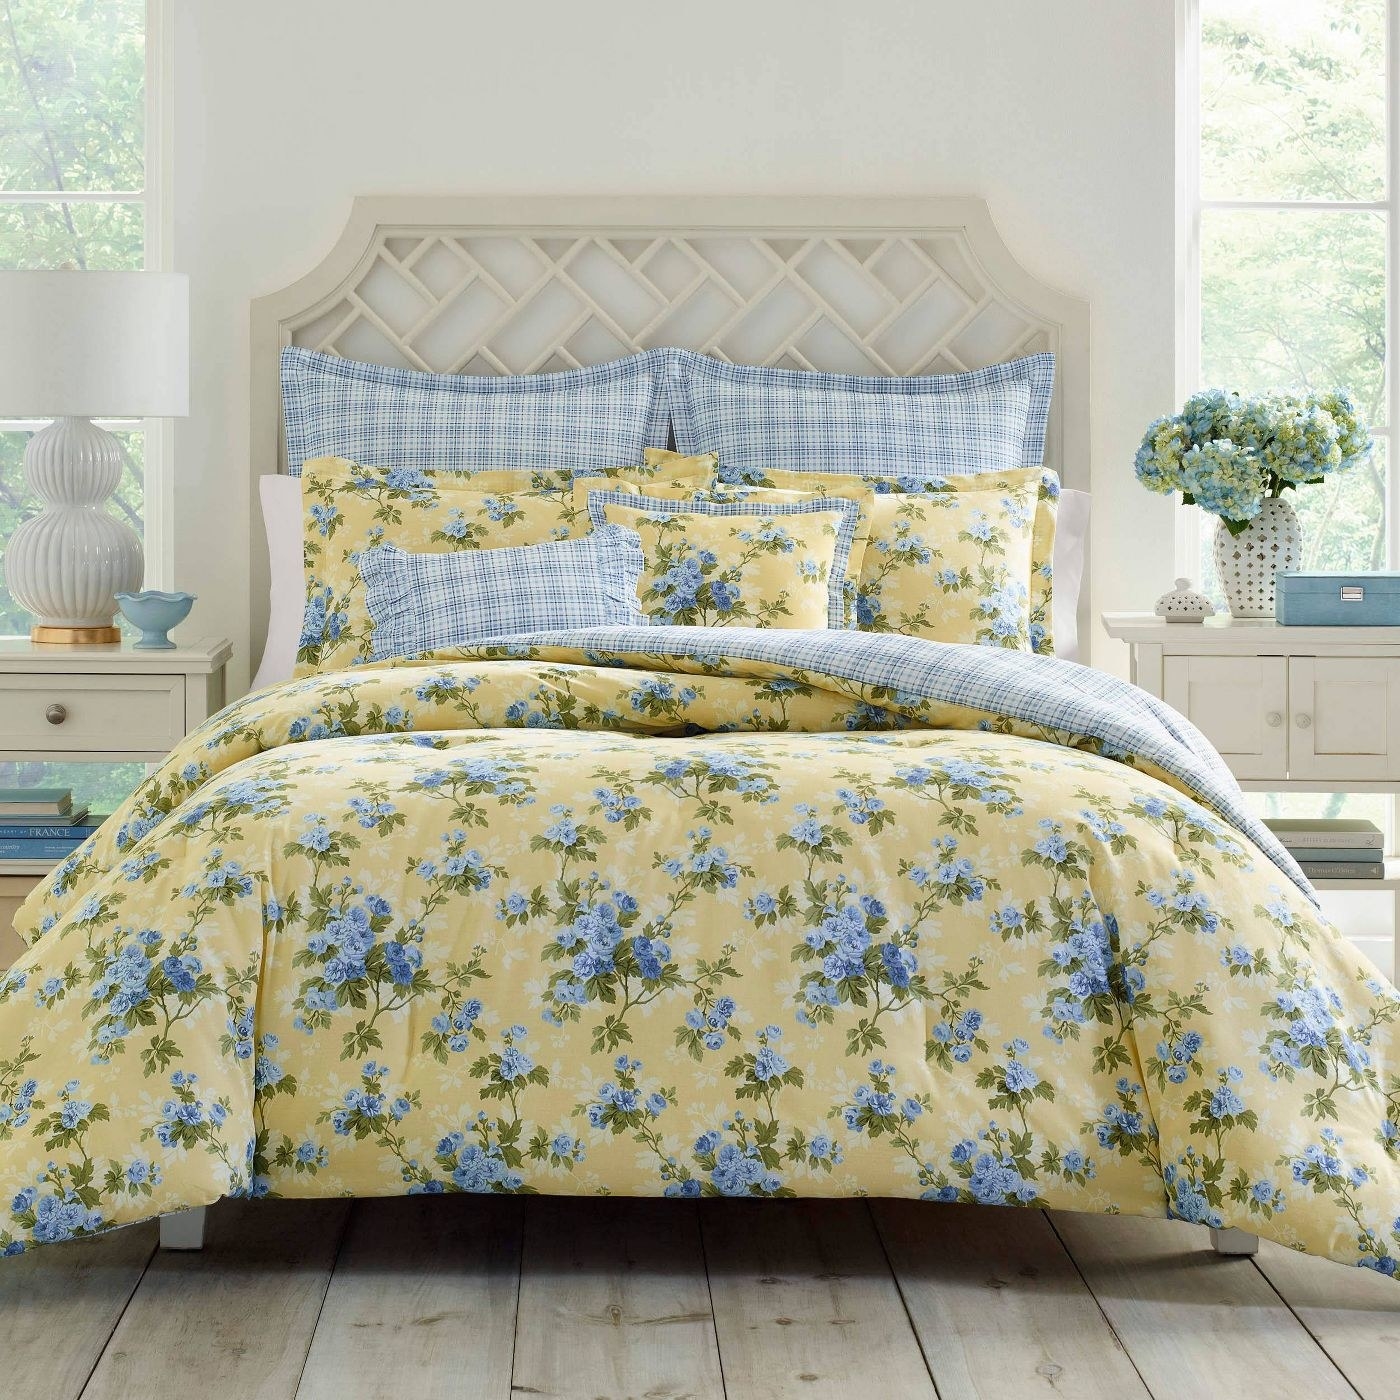 A bright yellow comforter with blue flowers on a bed.